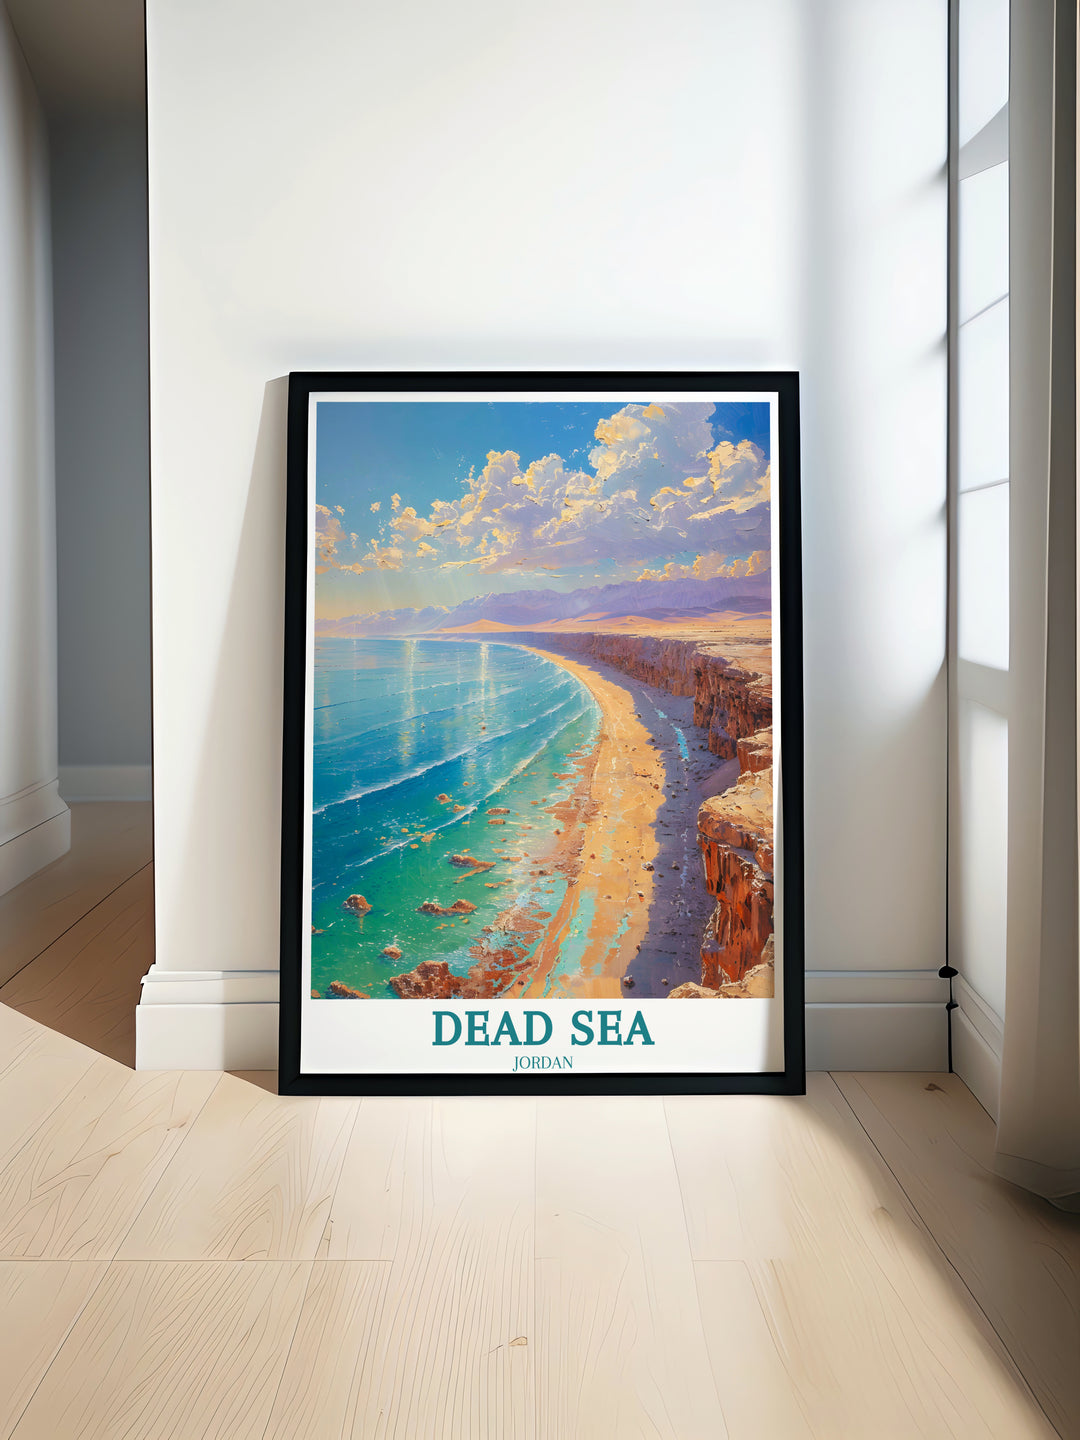 Featuring the iconic Dead Sea with its buoyant waters bordered by Israel and Jordan, this landscape print is a quintessential house warming gift for those fascinated by the wonders of the Middle East